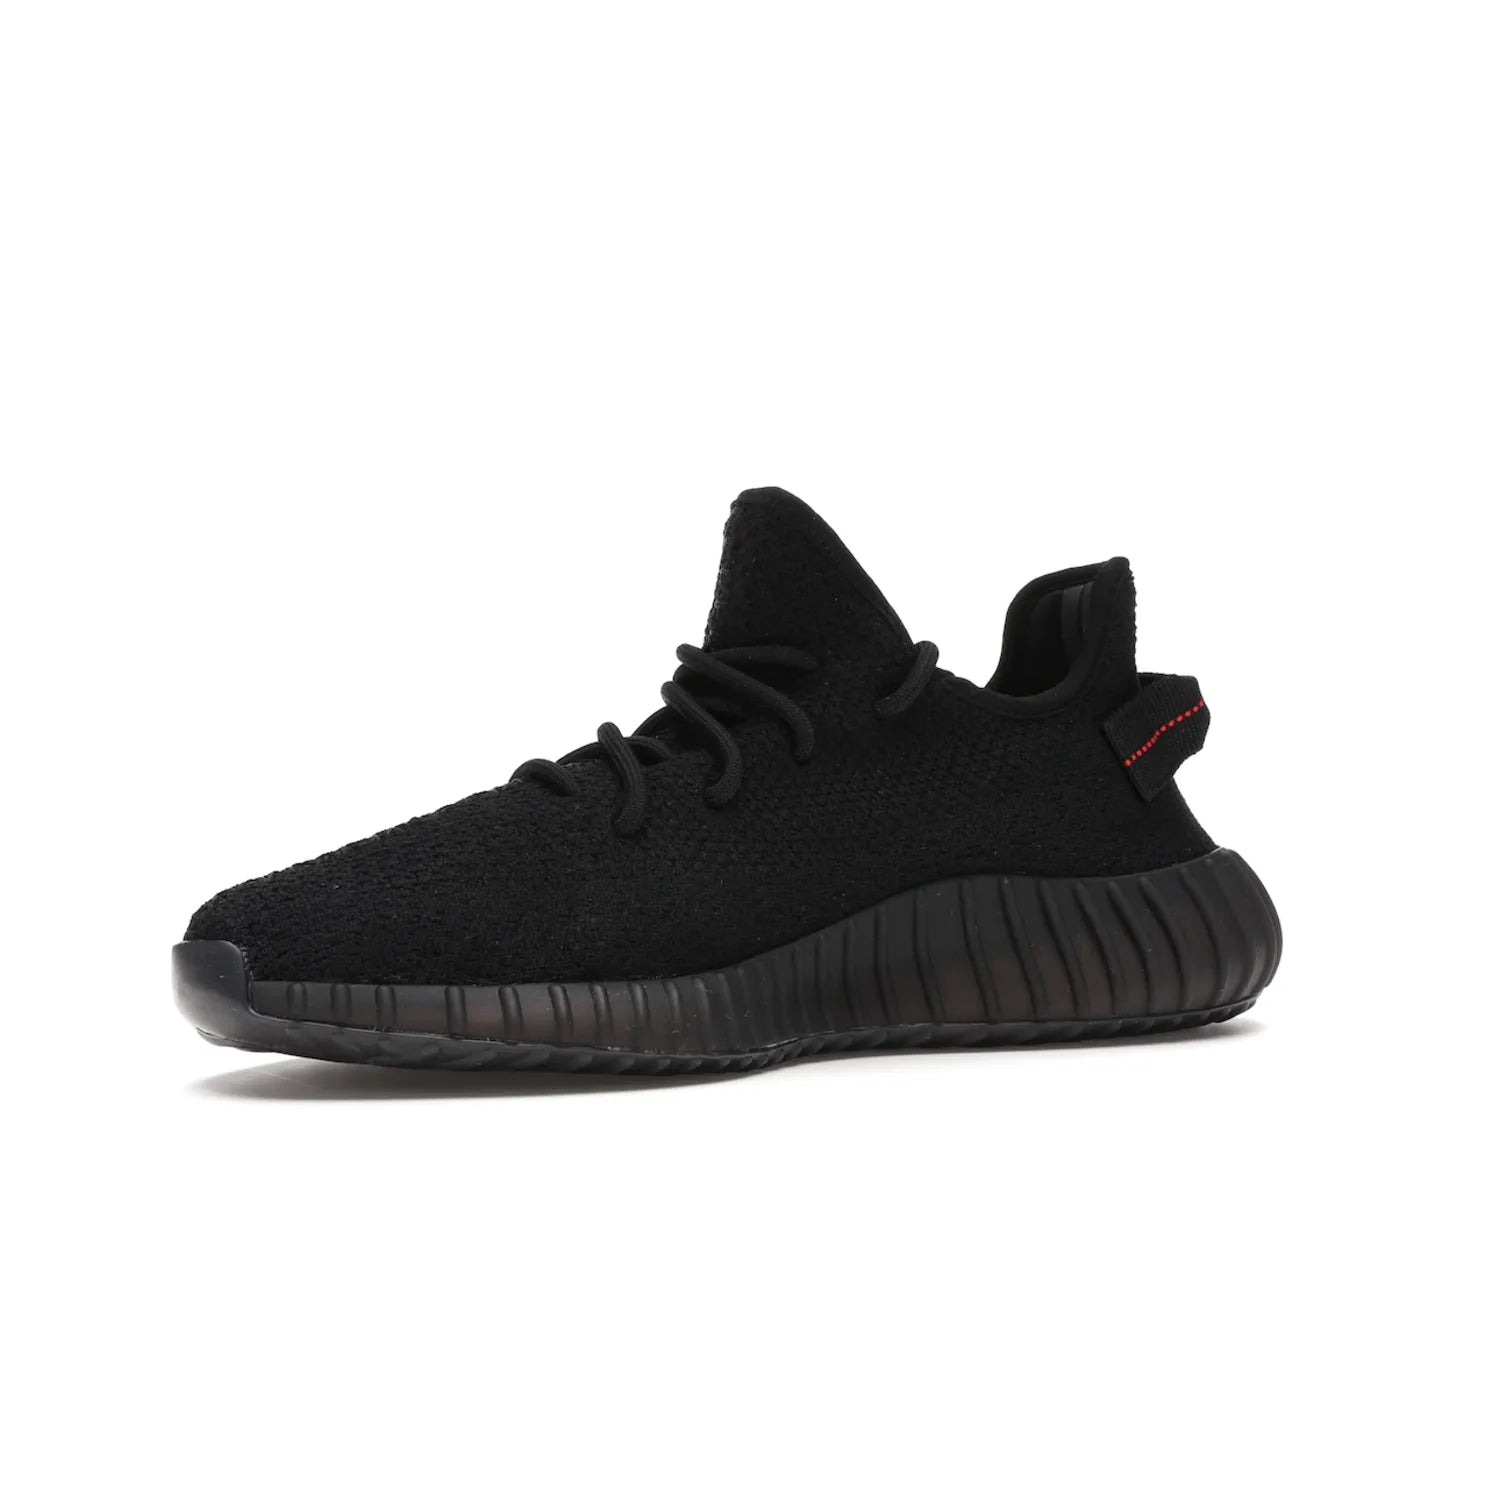 adidas Yeezy Boost 350 V2 Black Red (2017/2020) - Image 16 - Only at www.BallersClubKickz.com - Adidas Yeezy Boost 350 V2 Black Red: a classic colorway featuring black Primeknit upper, BOOST cushioning system, and iconic "SPLY-350" text. Released in 2017 for a retail price of $220.